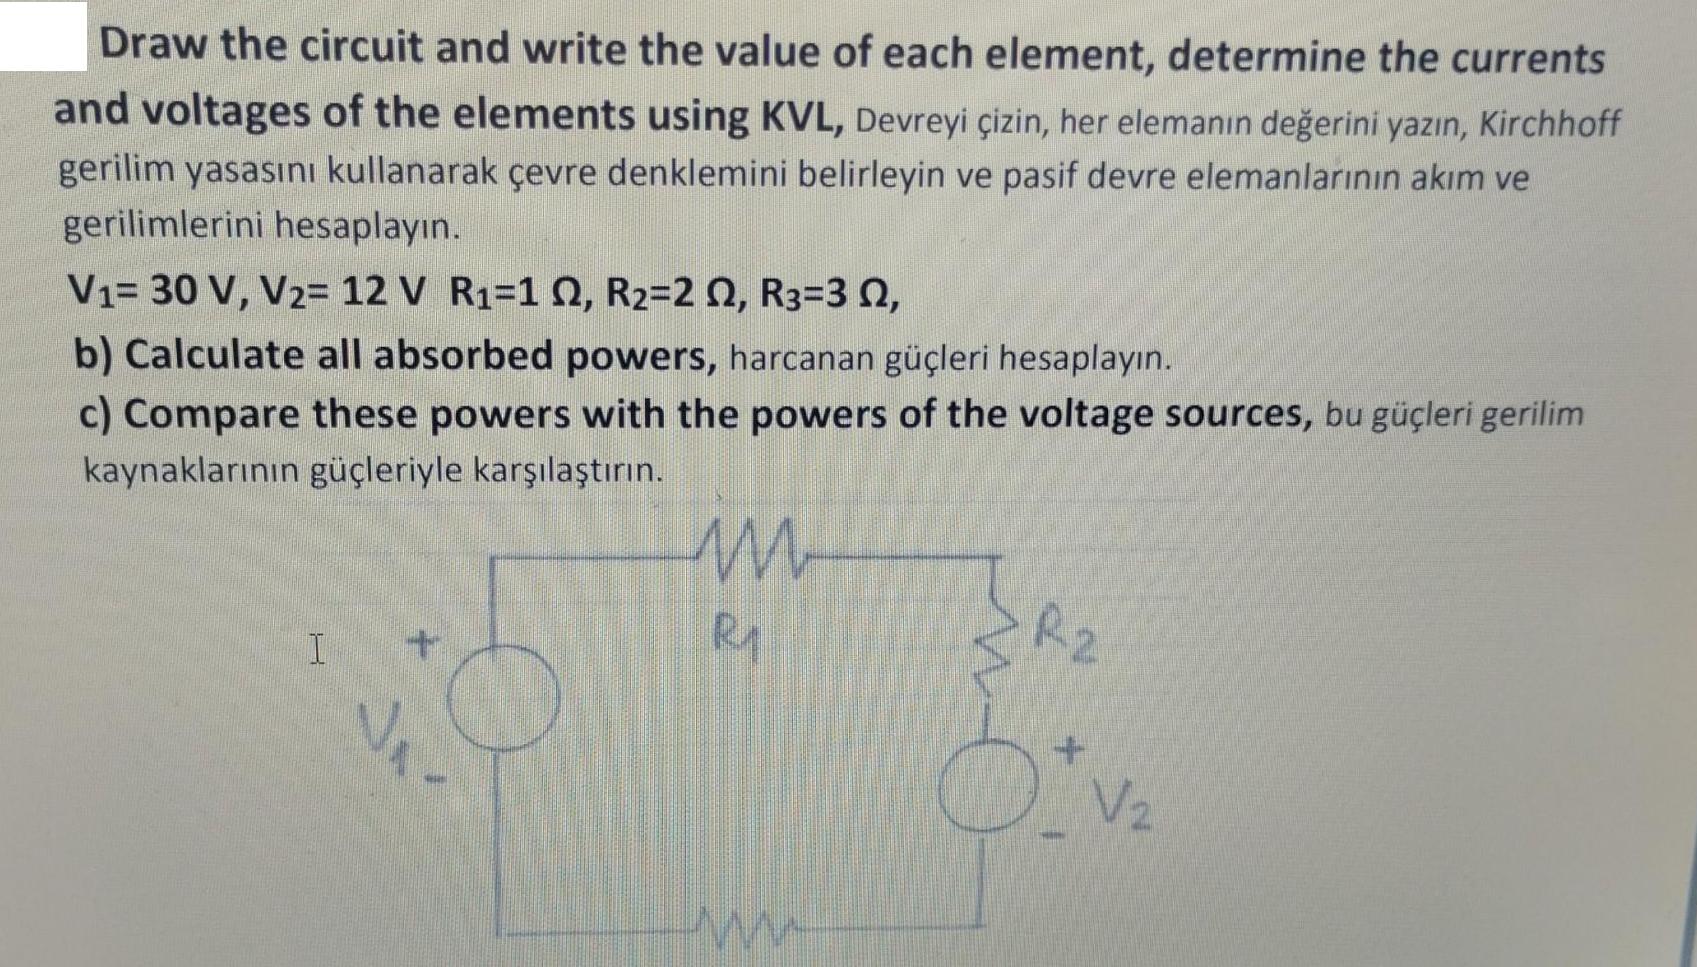 Draw the circuit and write the value of each element, determine the currents and voltages of the elements